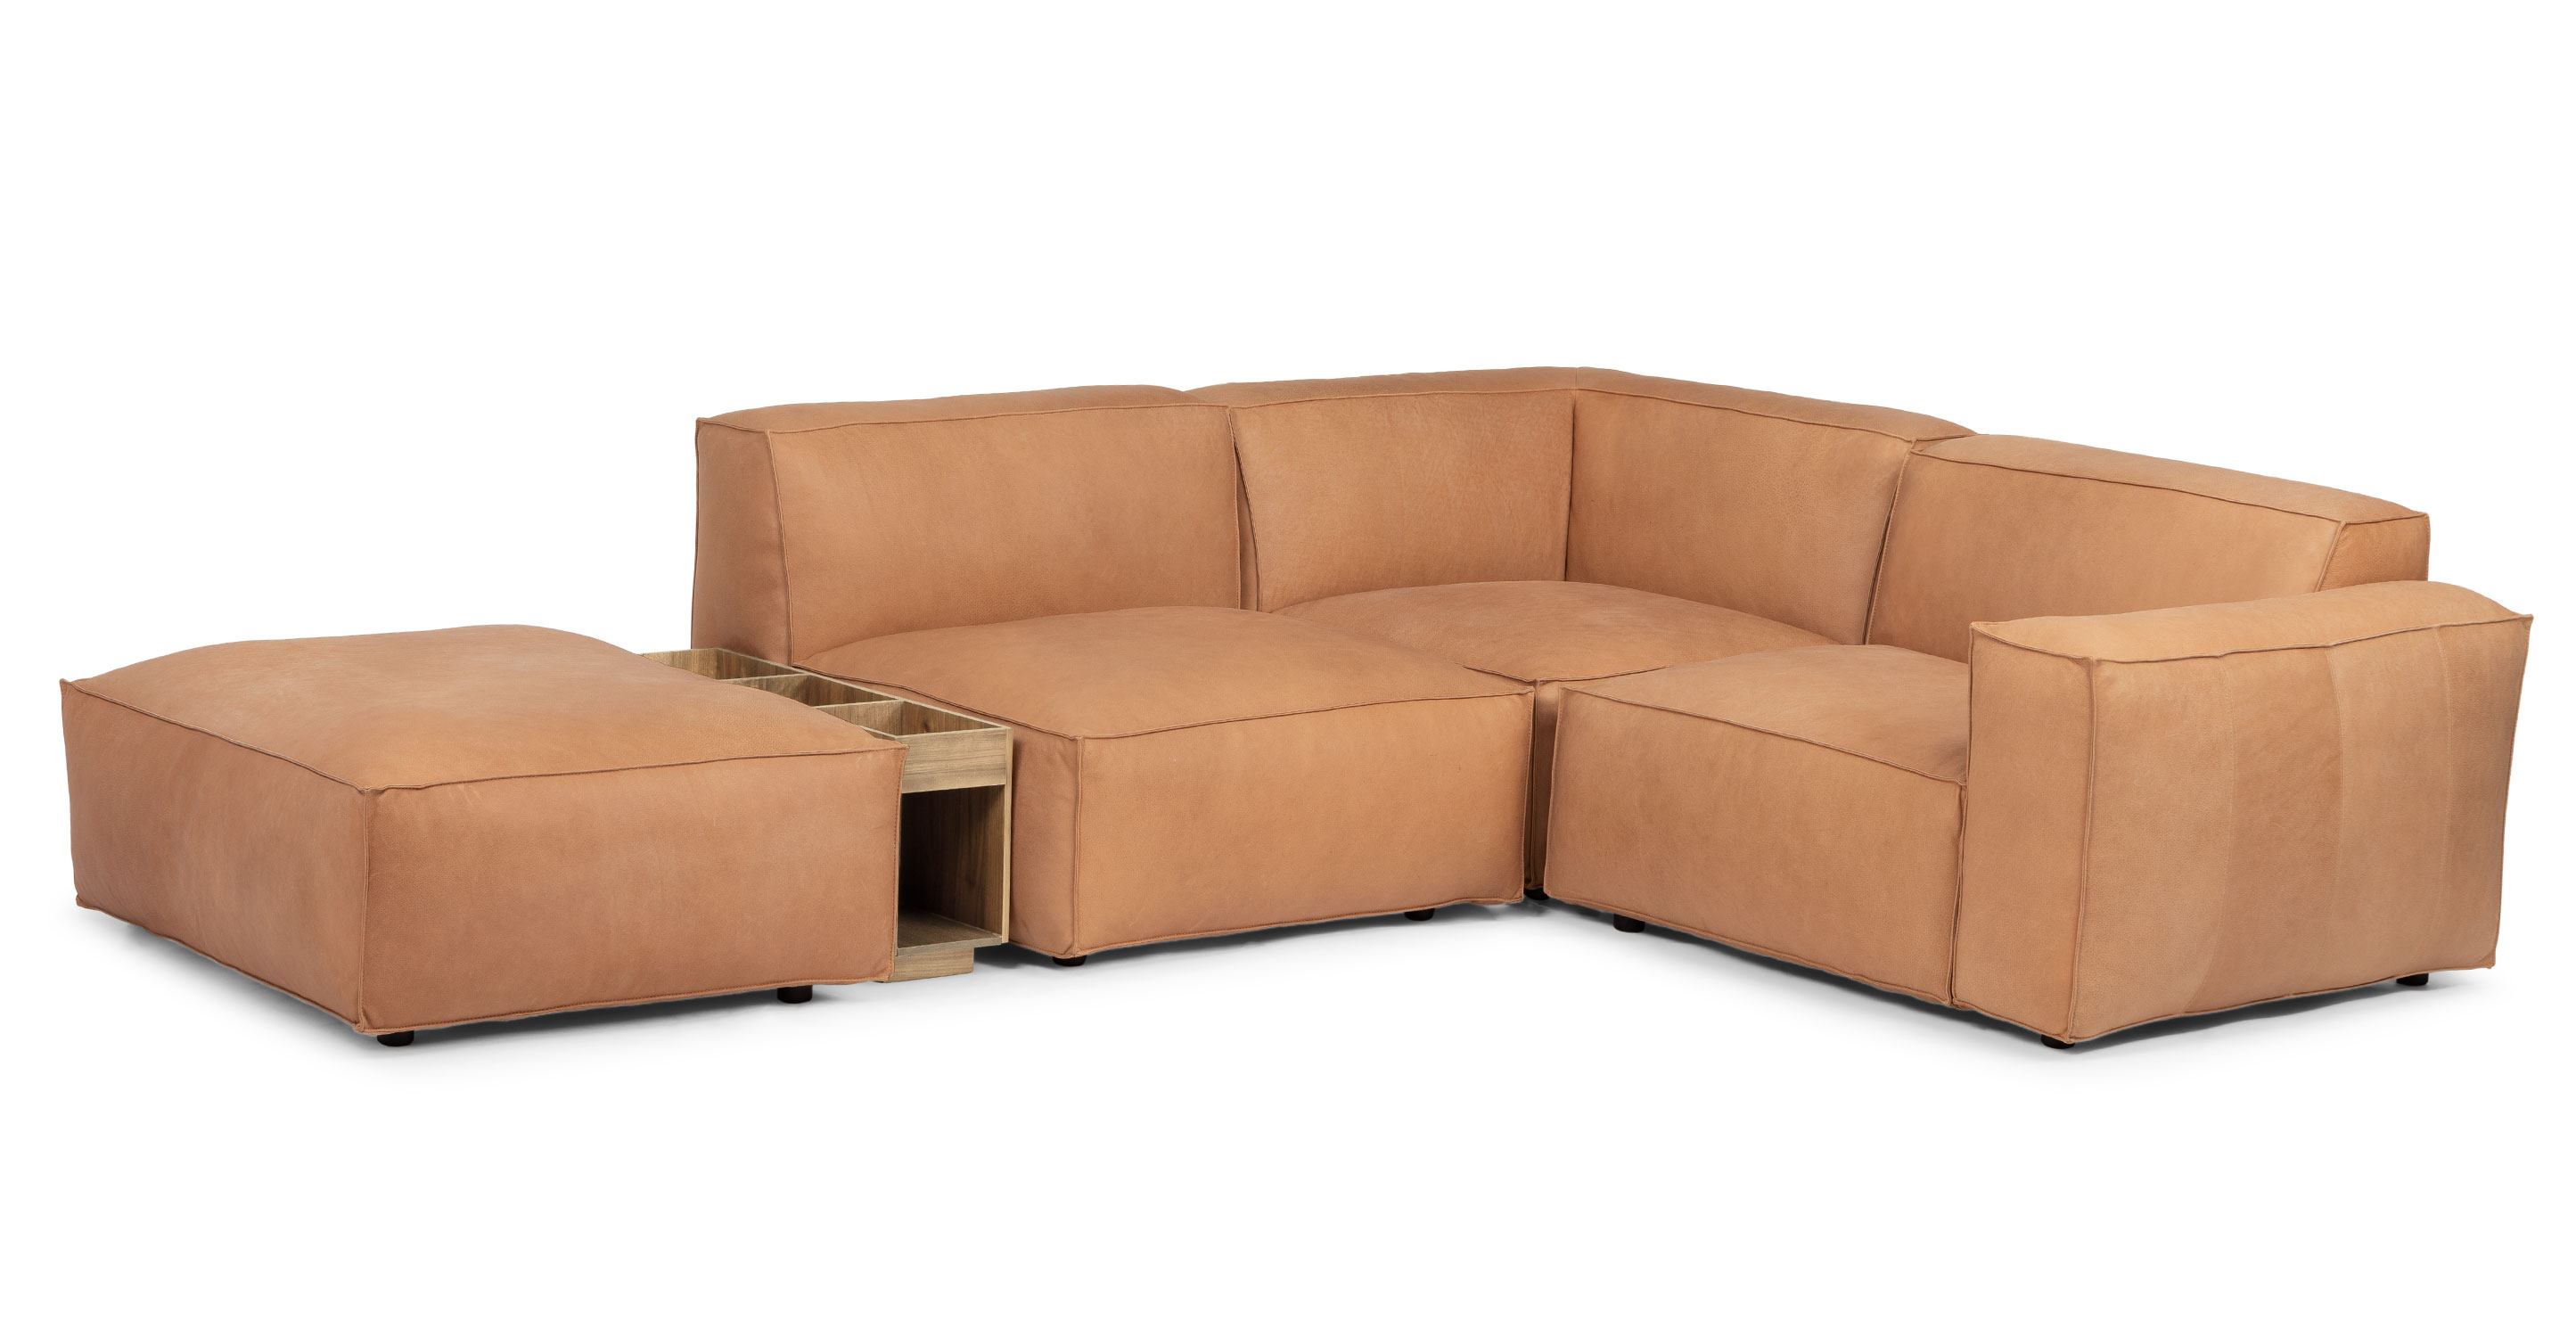 Solae Canyon Tan / Oak Right Arm Corner Sectional